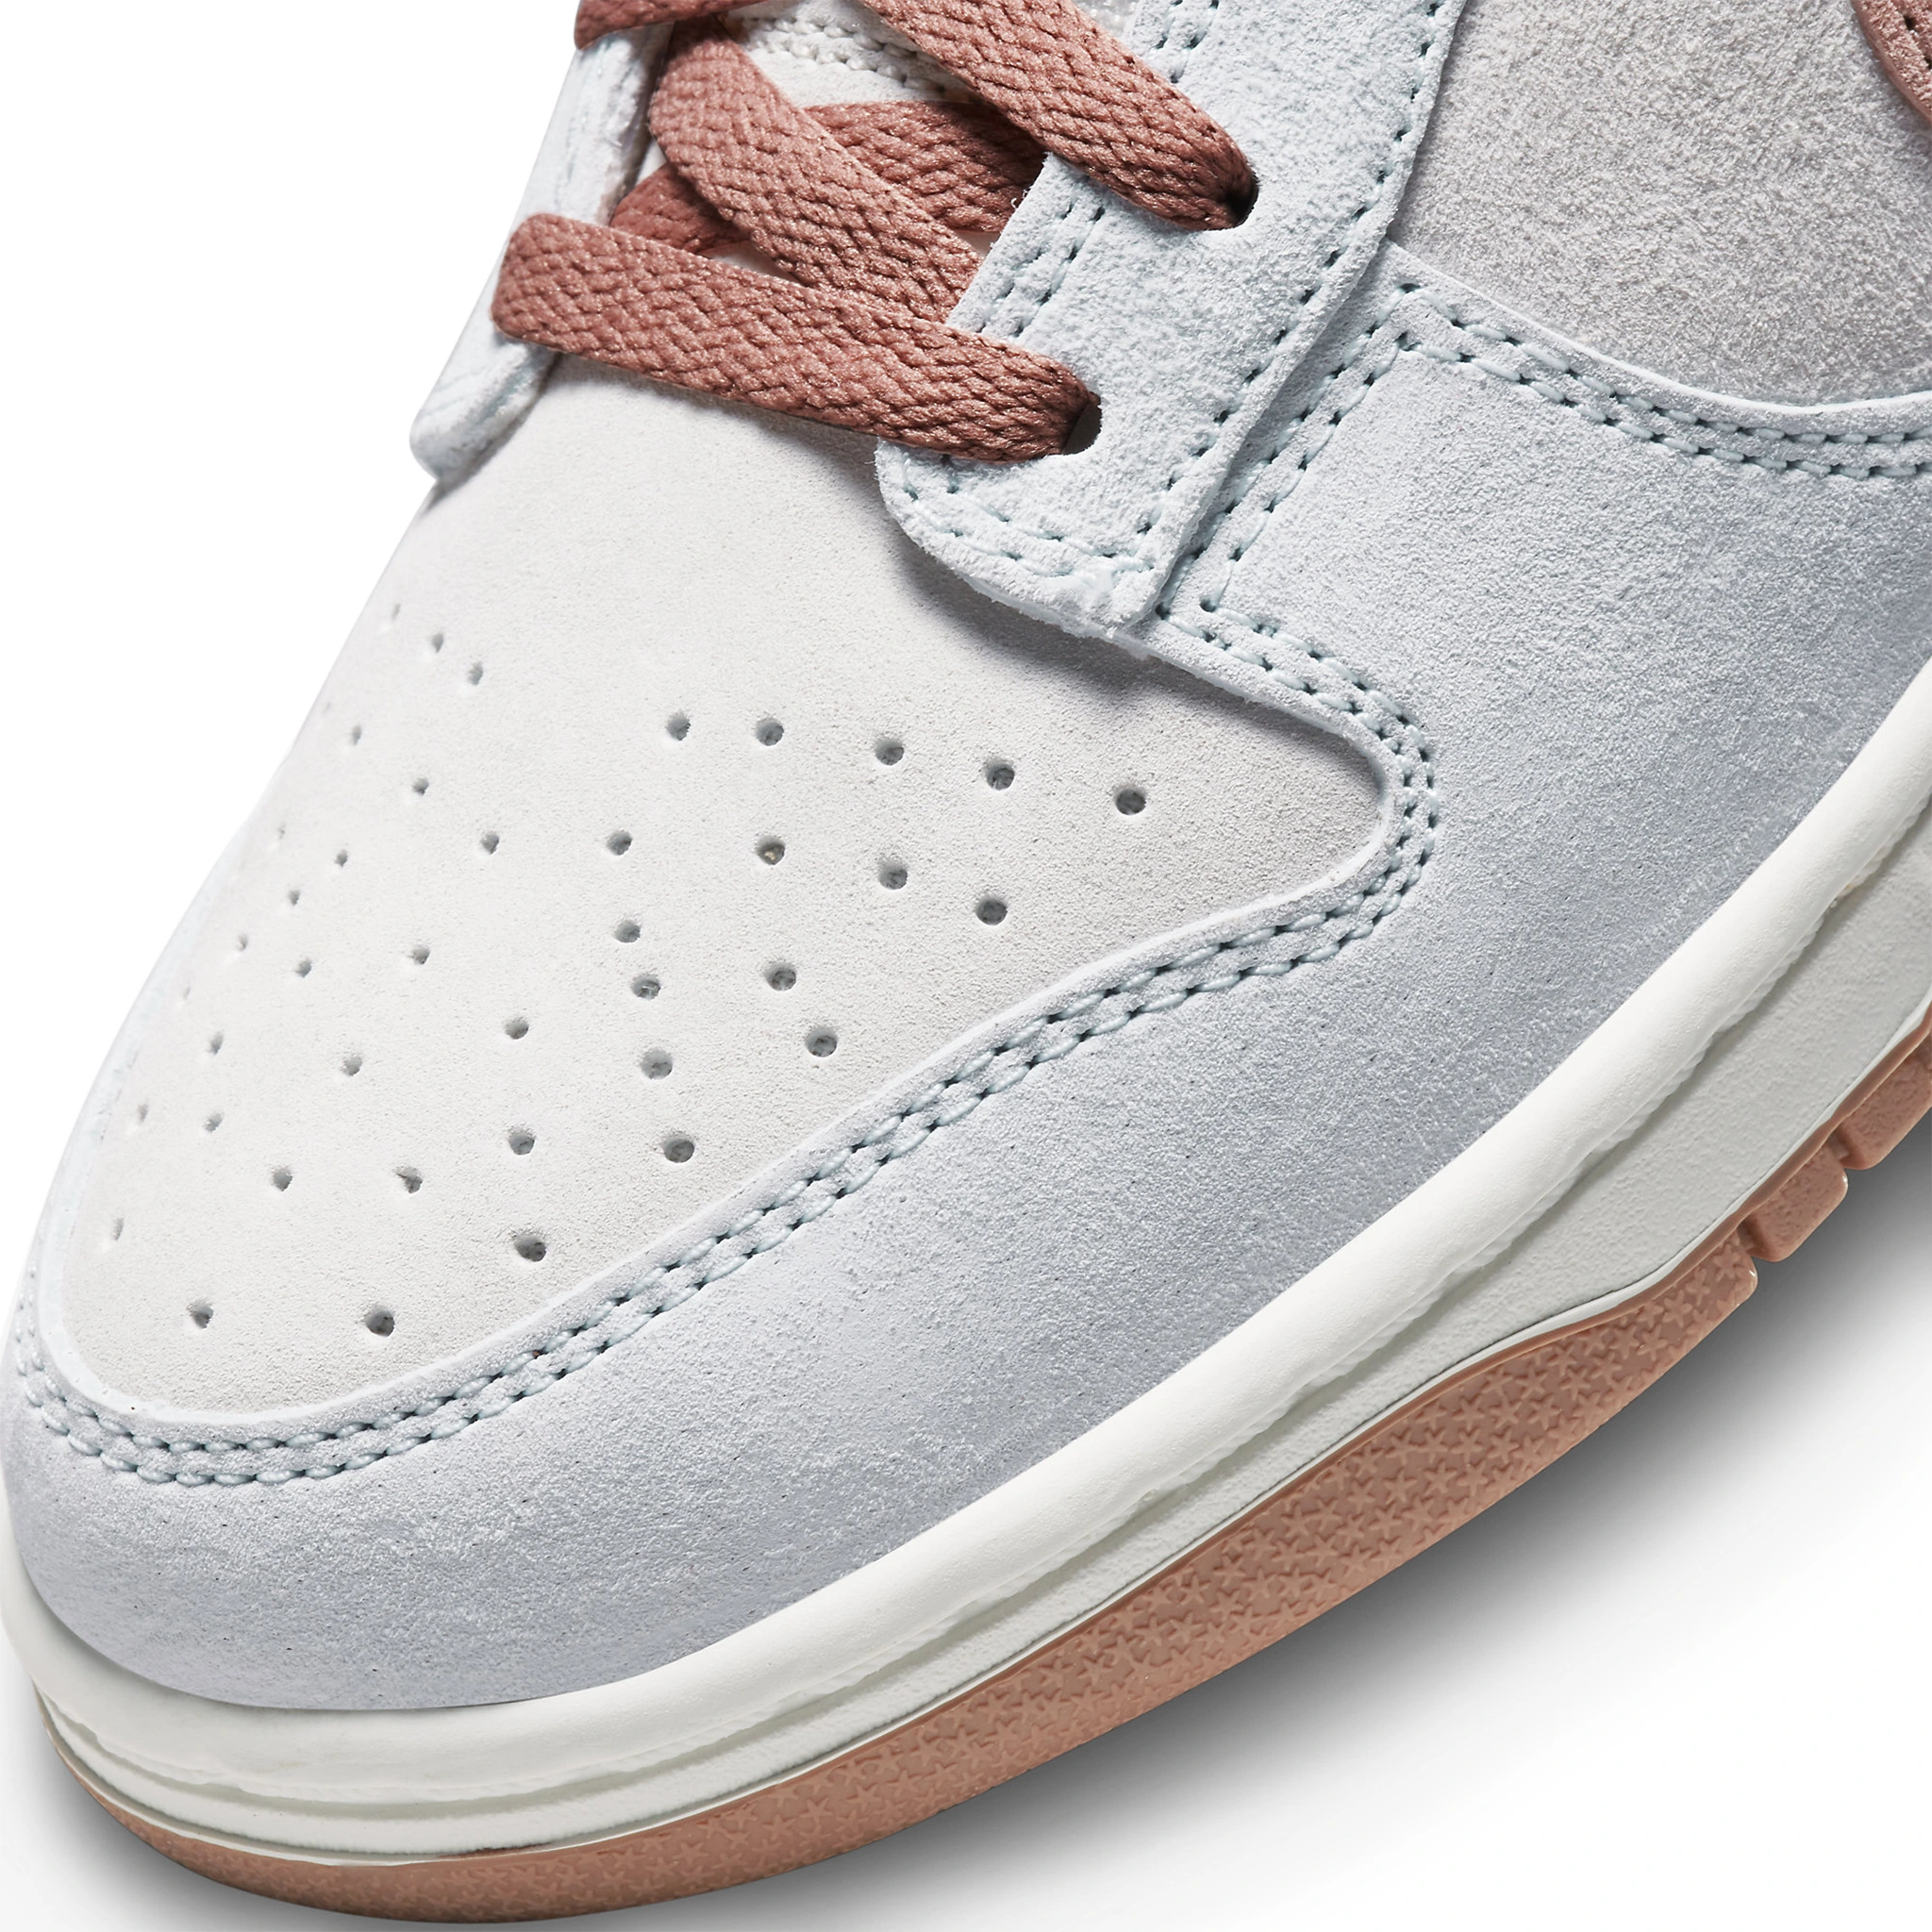 Toe box view of Nike Dunk Low Fossil Rose DH7577-001